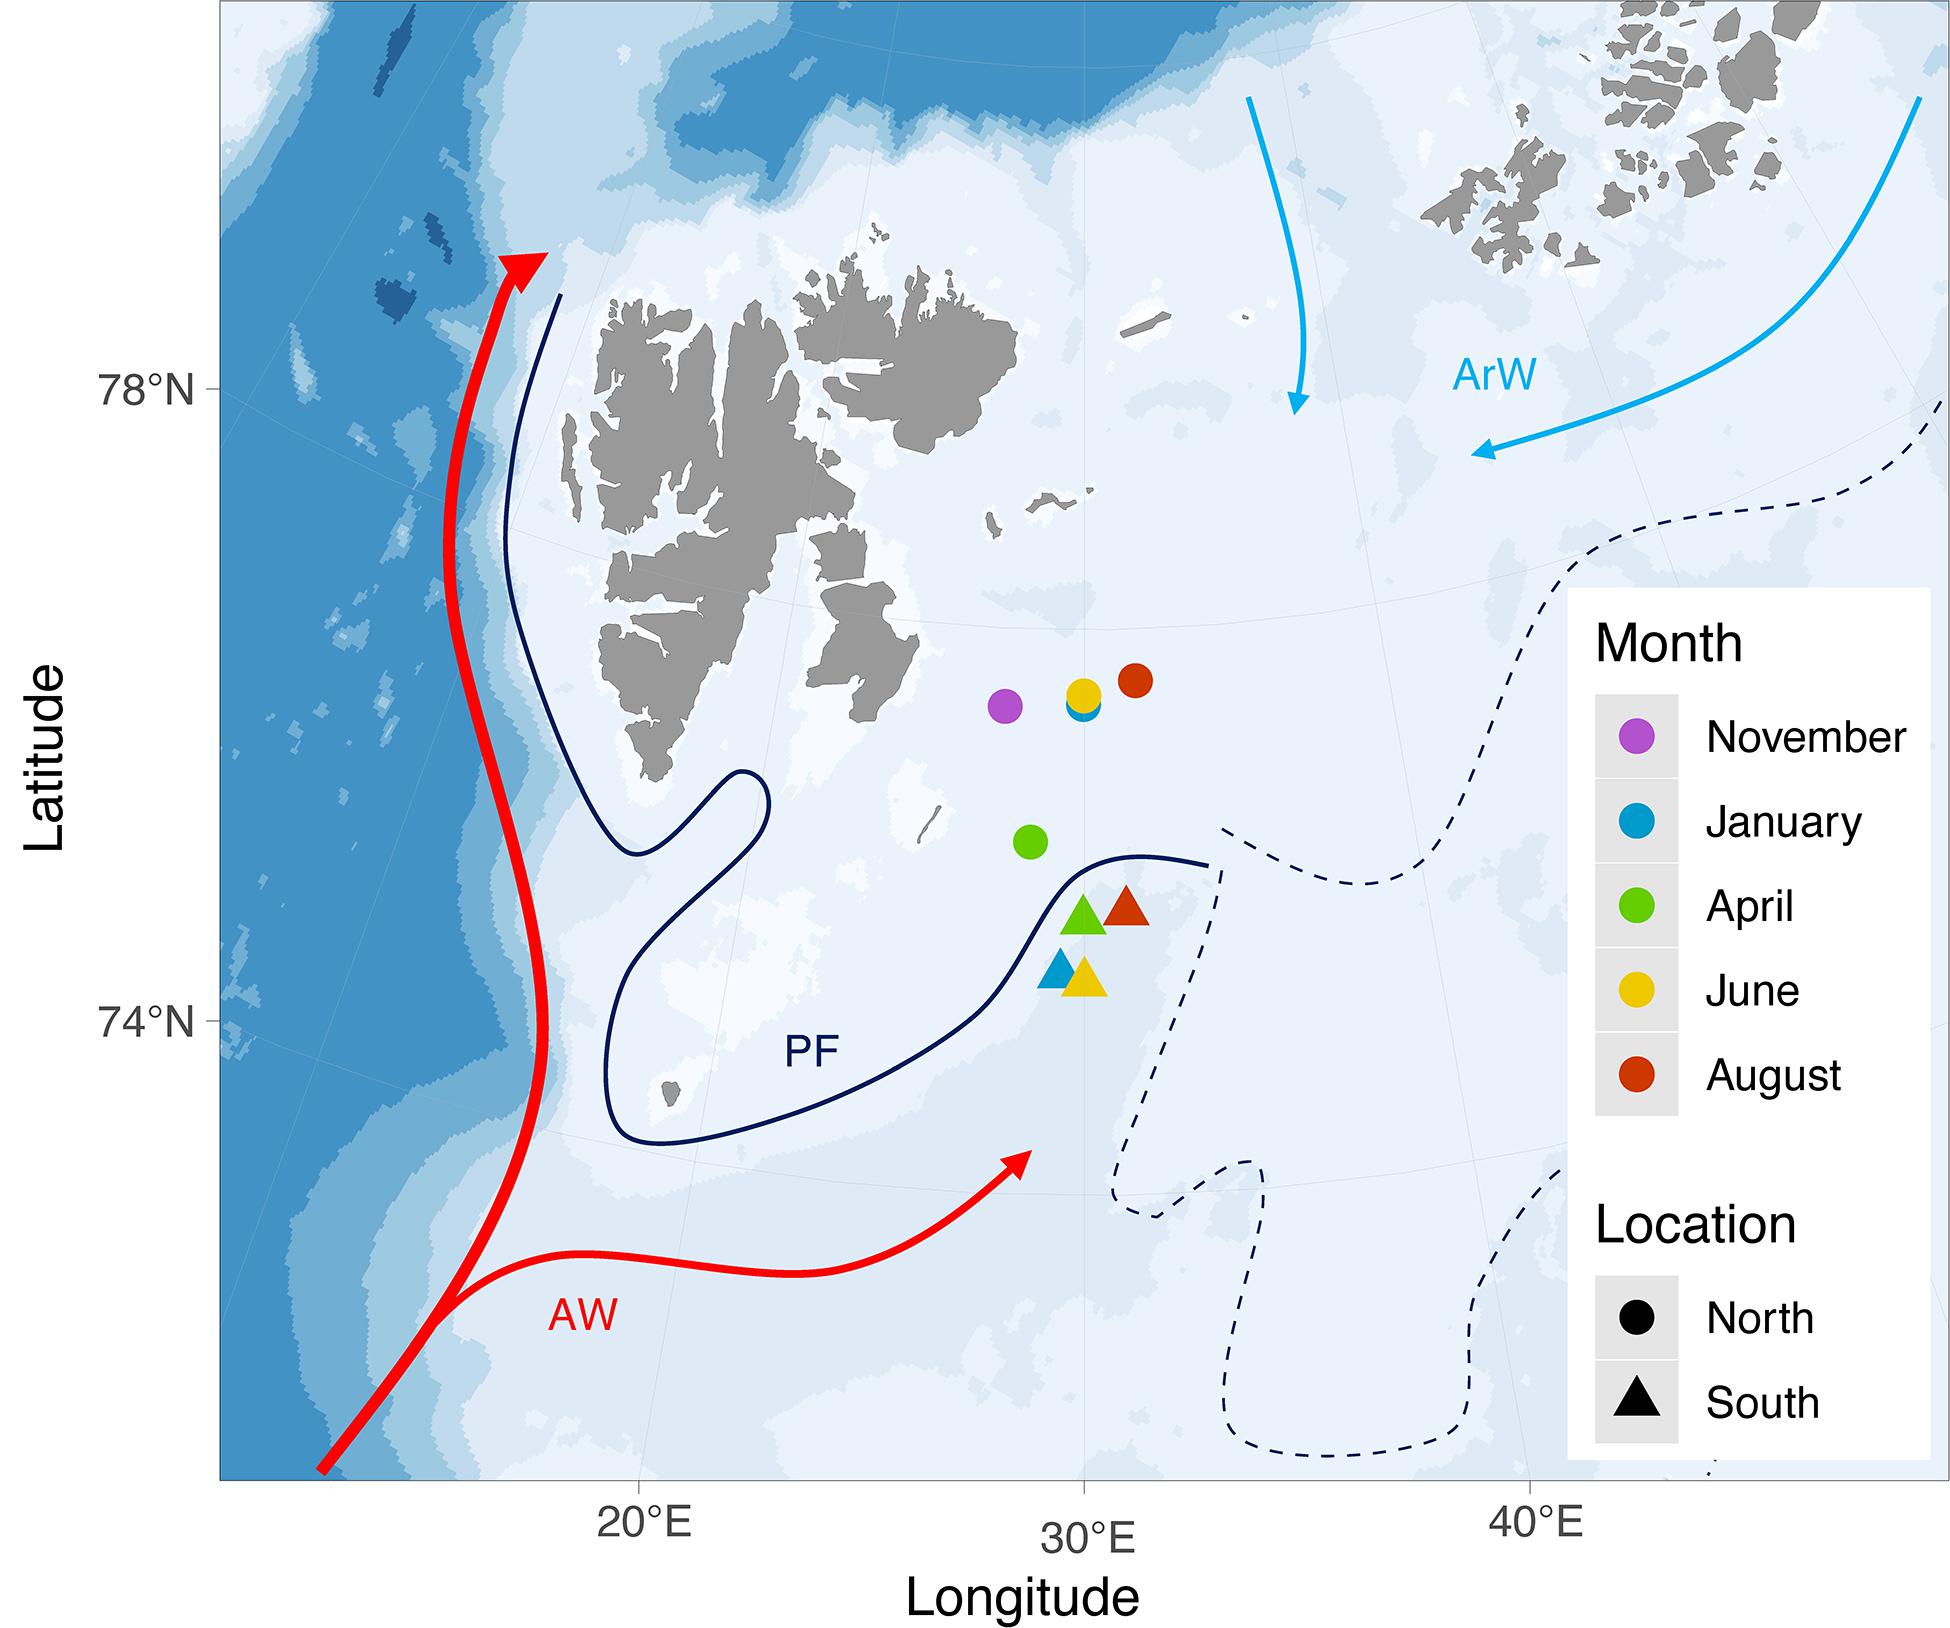 Seasonality Revealed Polar Barents Frontiers Barcoding Front Life-History by and DNA the Sea Traits Diversity, | Across Meroplankton High-Throughput